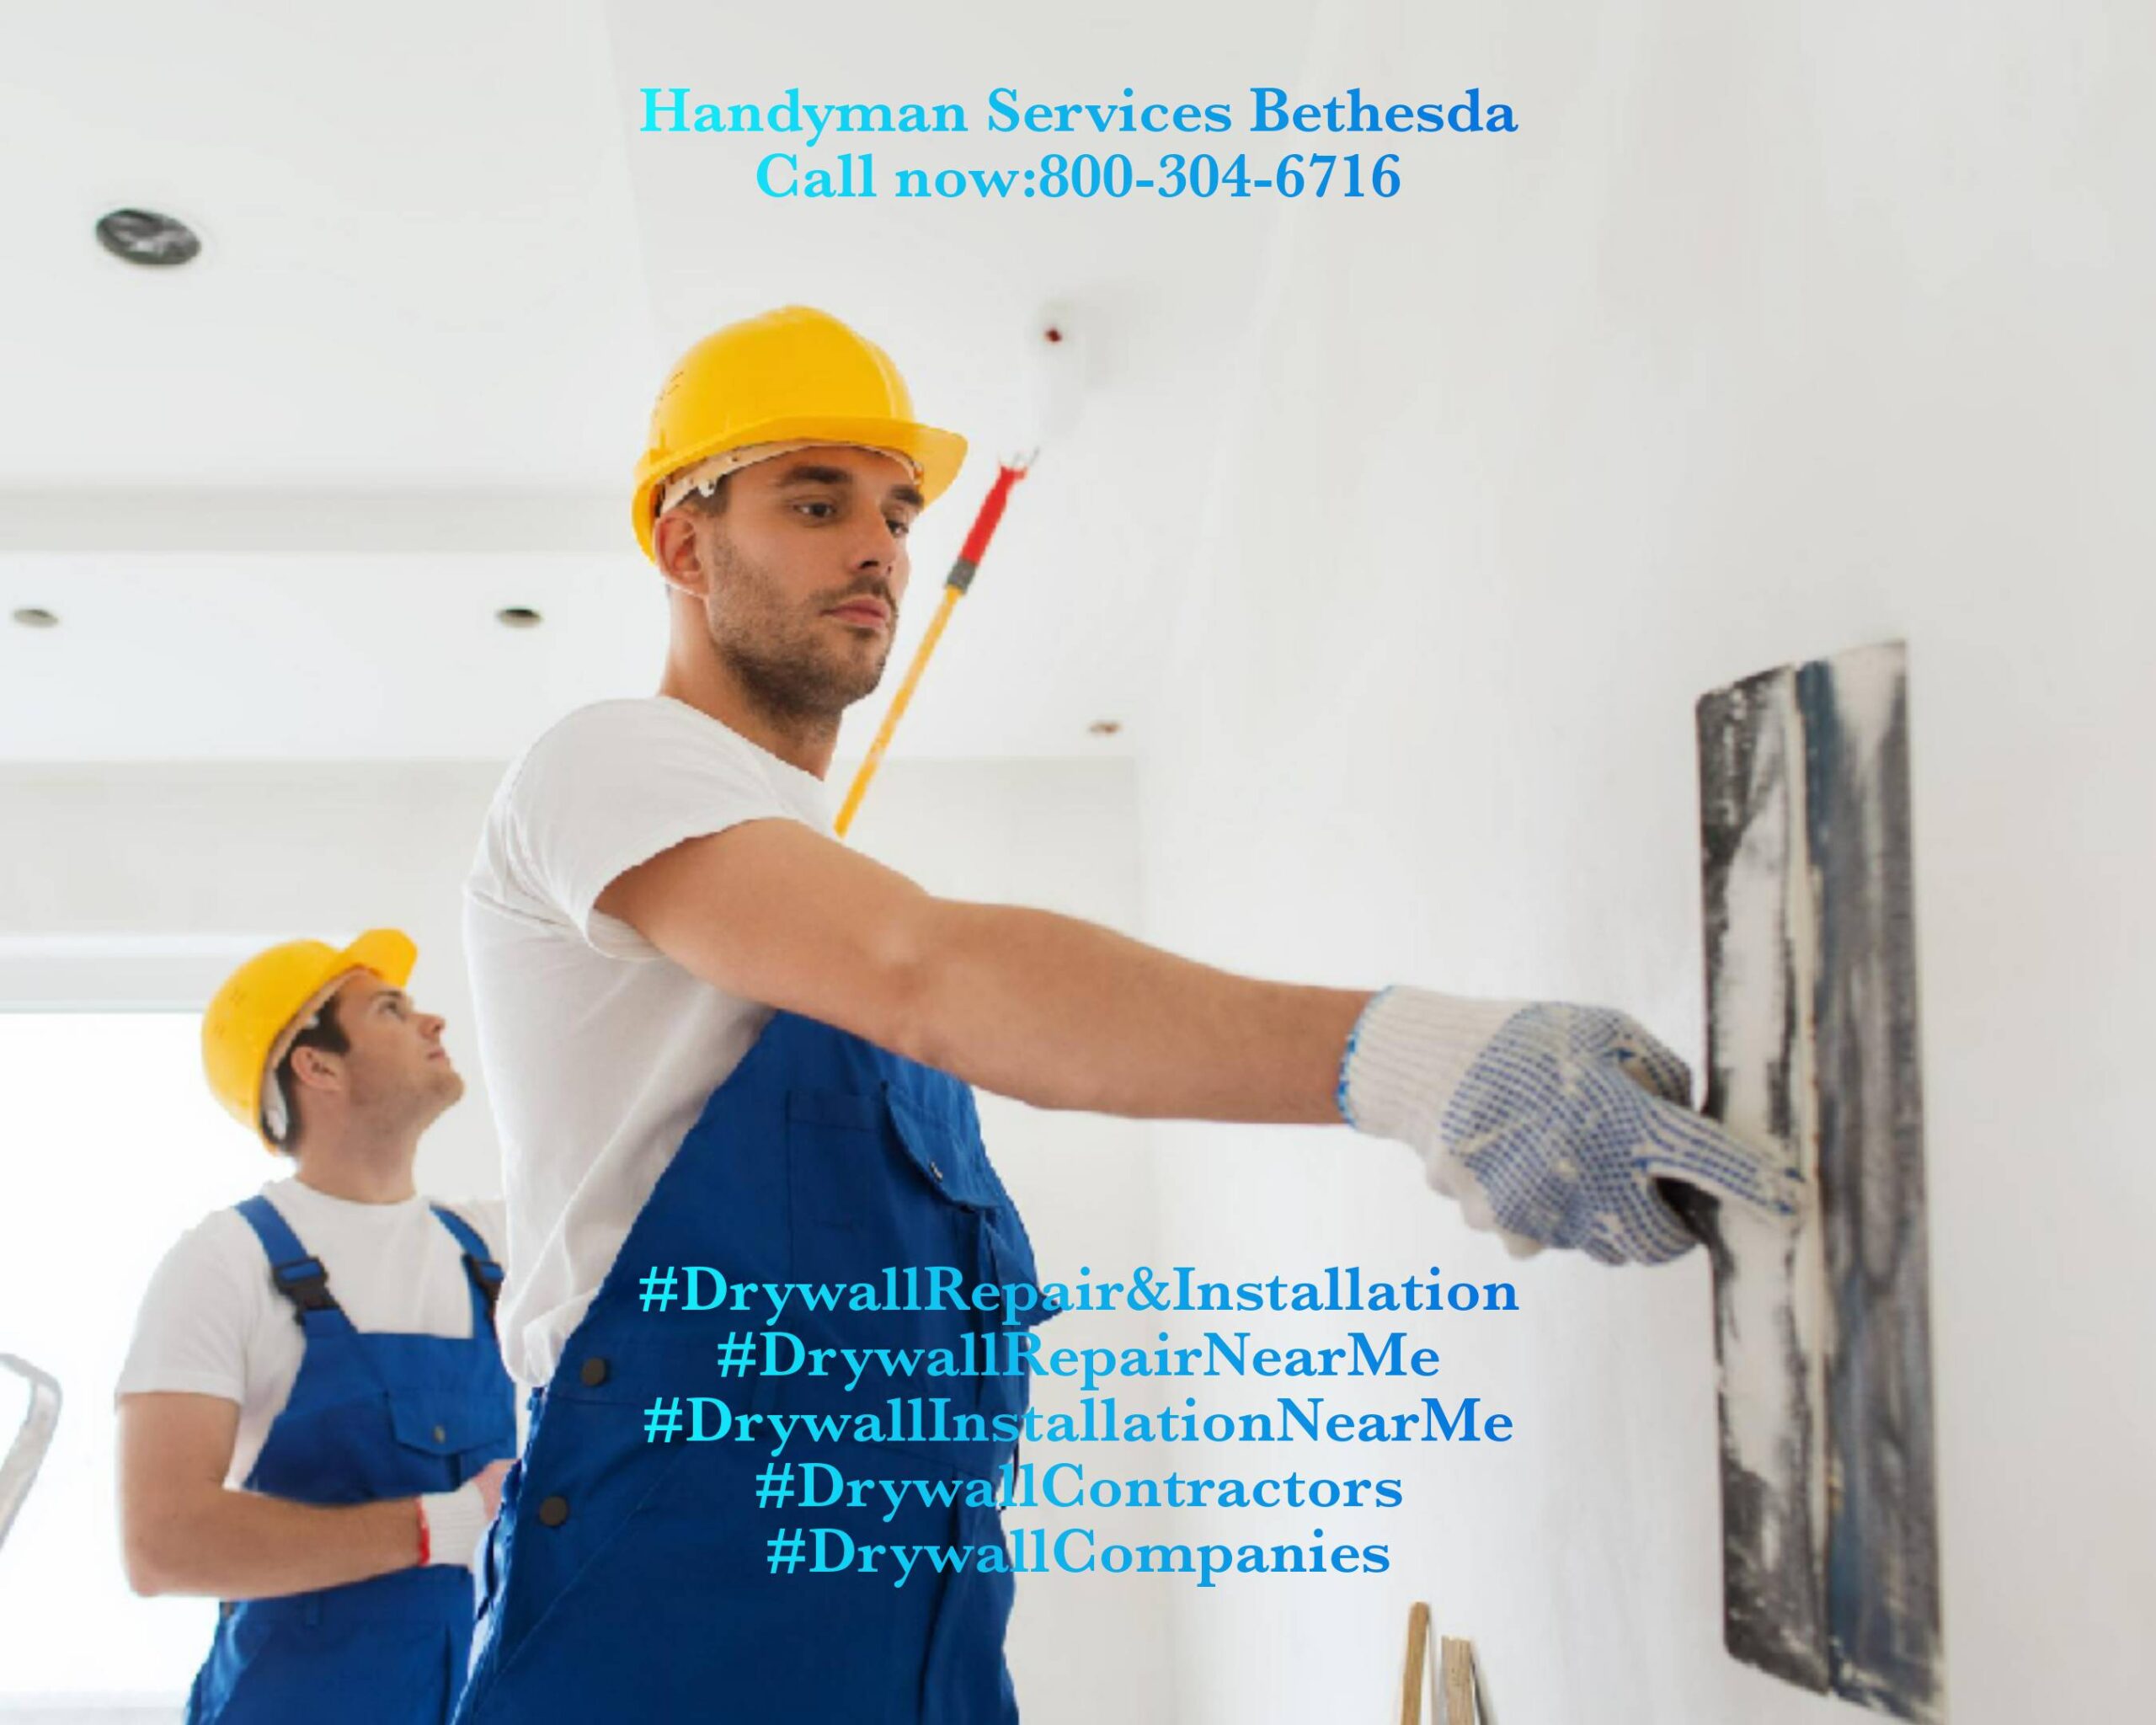 Best Drywall Company Hold the Art of Drywall Repair & Installation.